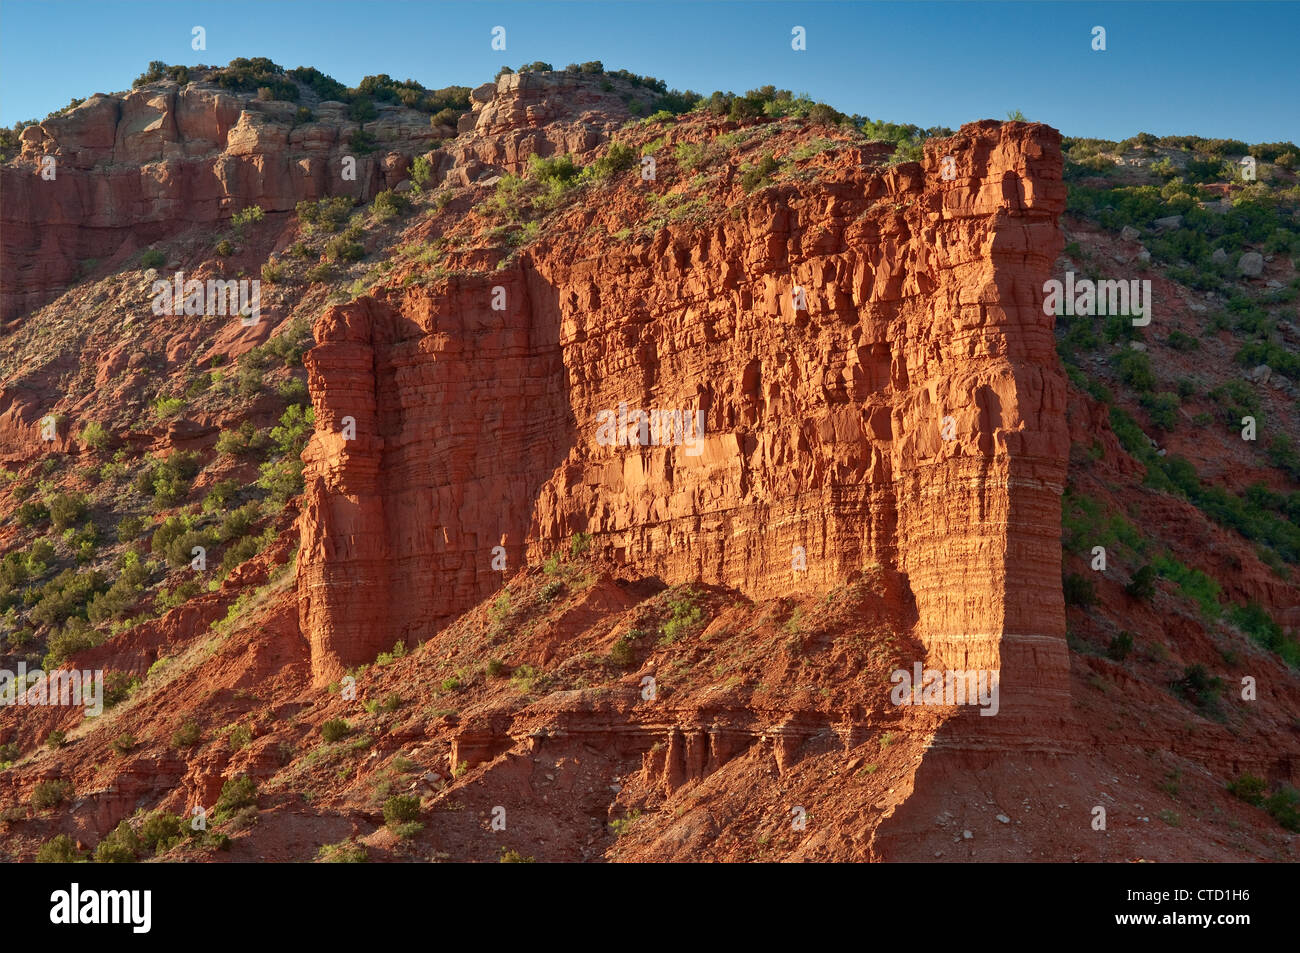 Haynes Ridge eroded buttes and cliffs in Caprock Canyons State Park, Texas, USA Stock Photo